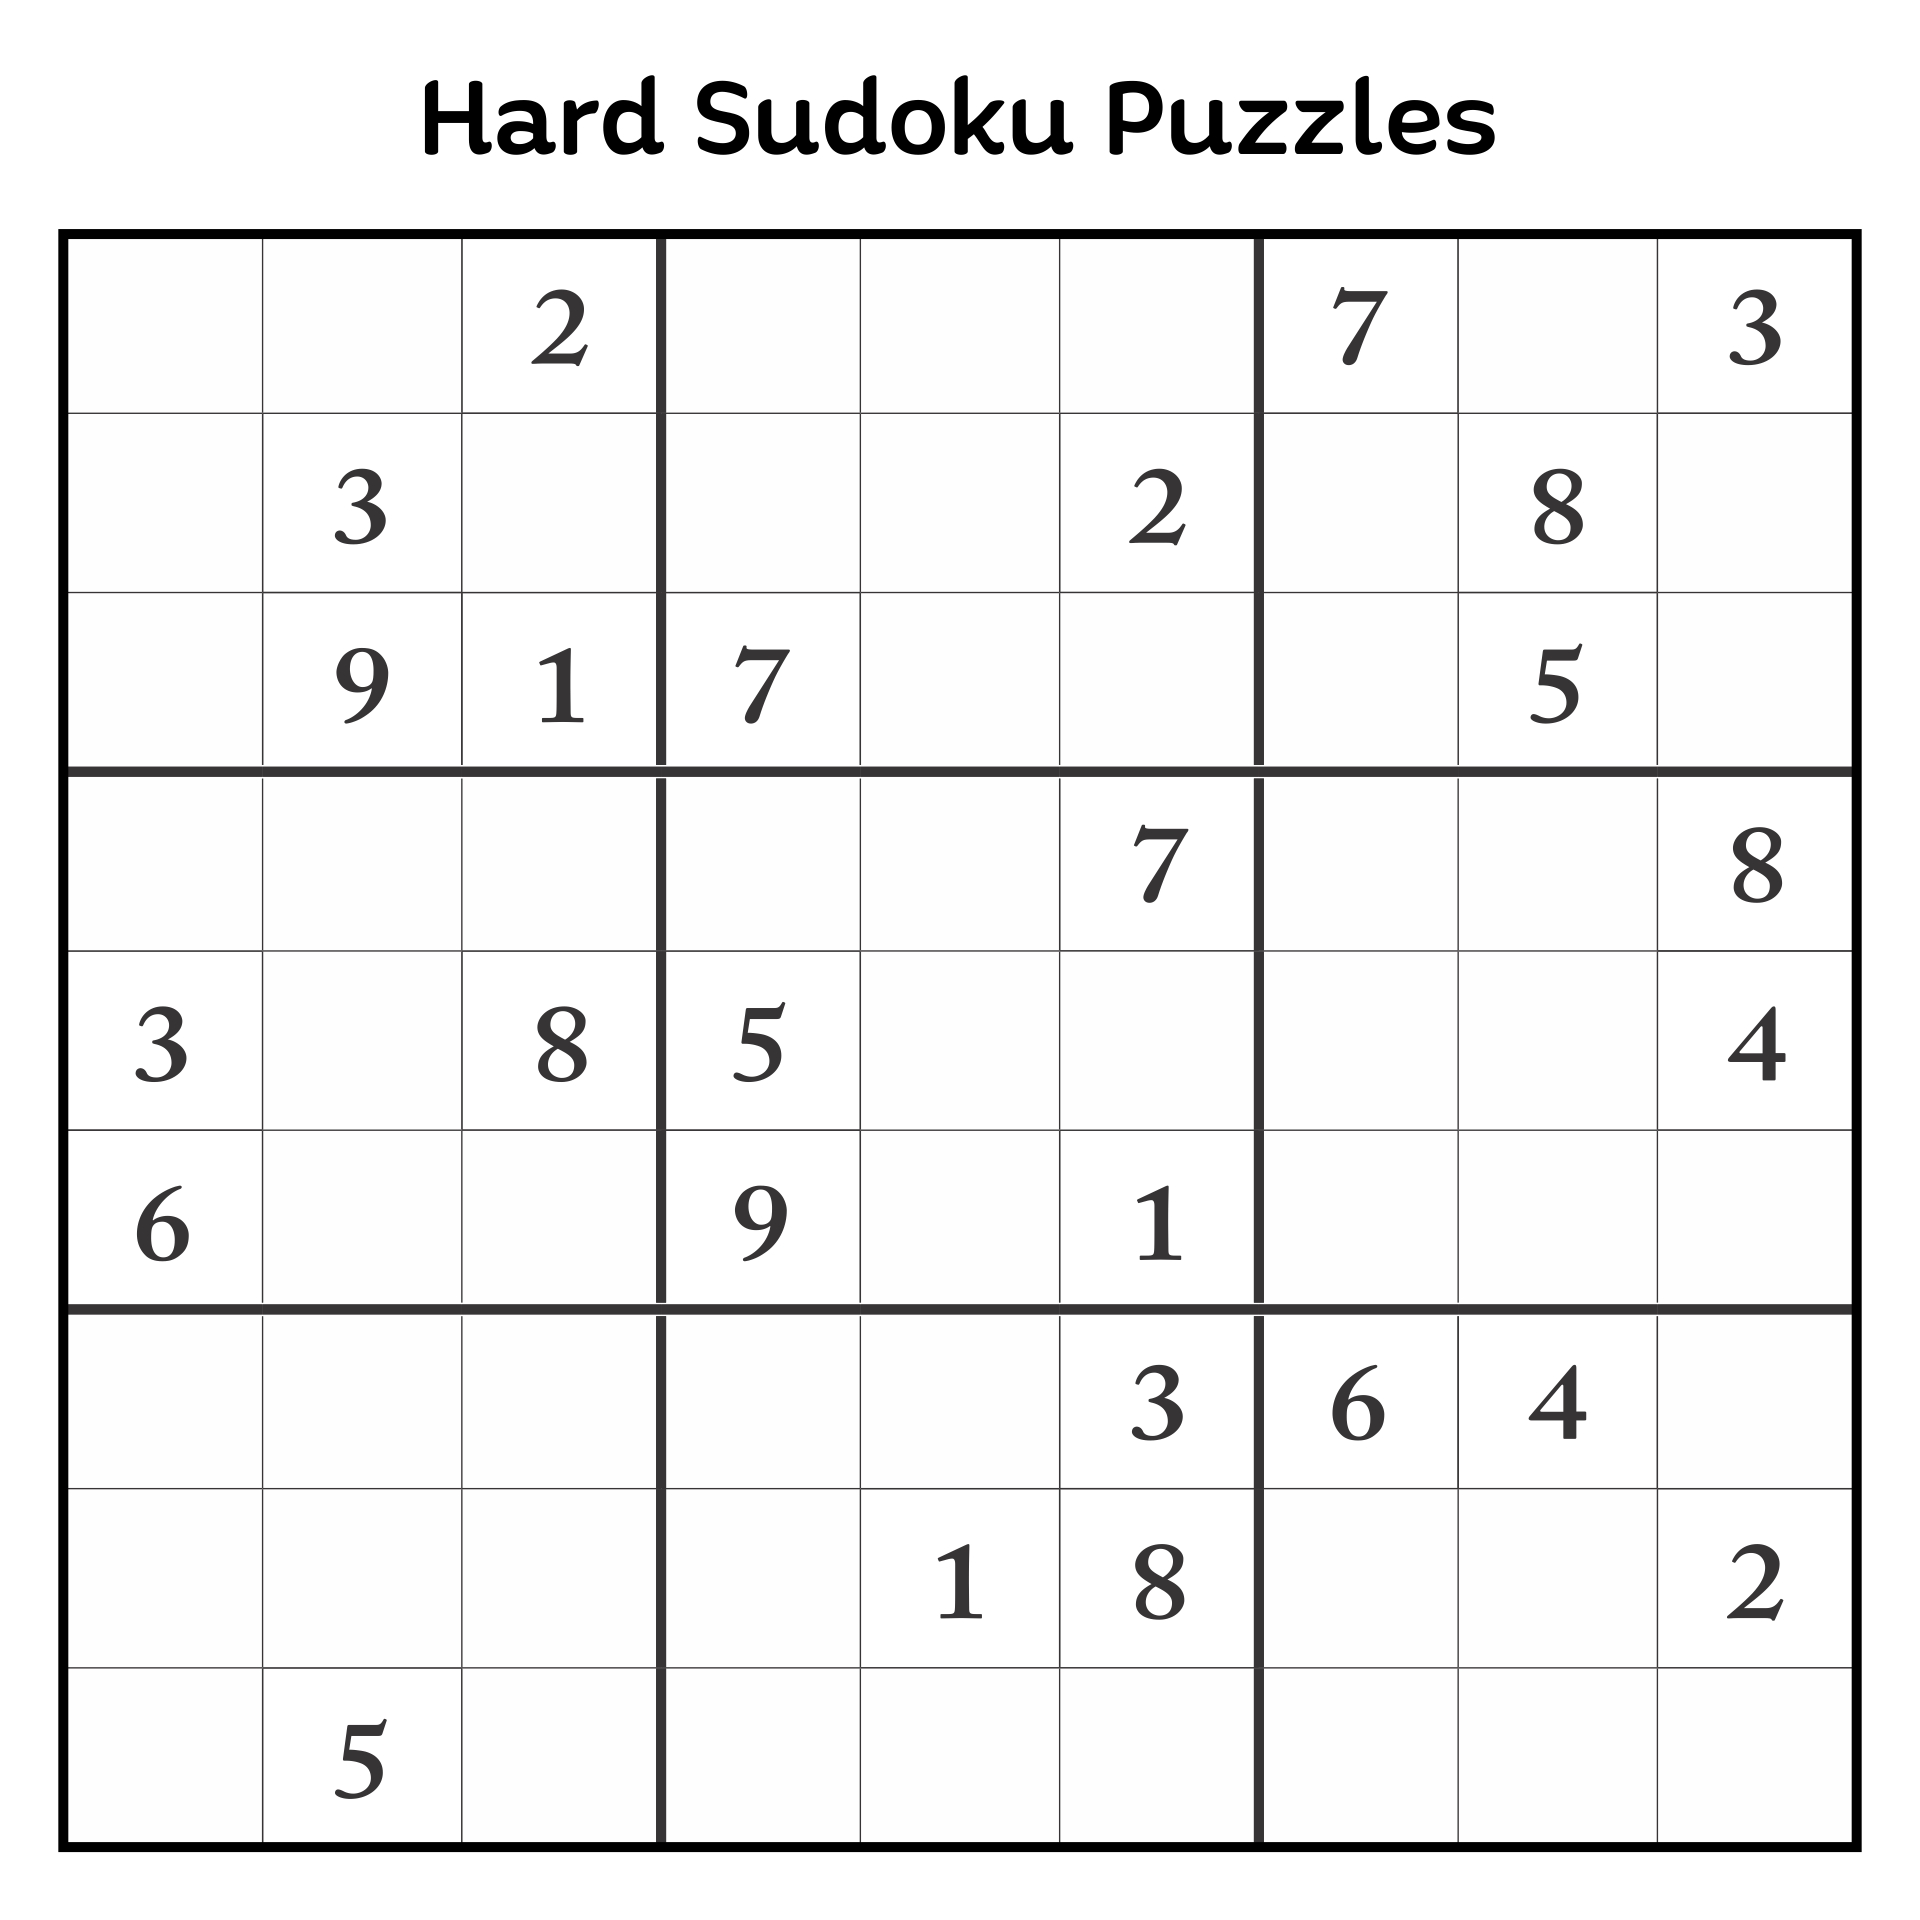 5 Best Images of Printable Sudoku Puzzles To Print Printable Sudoku